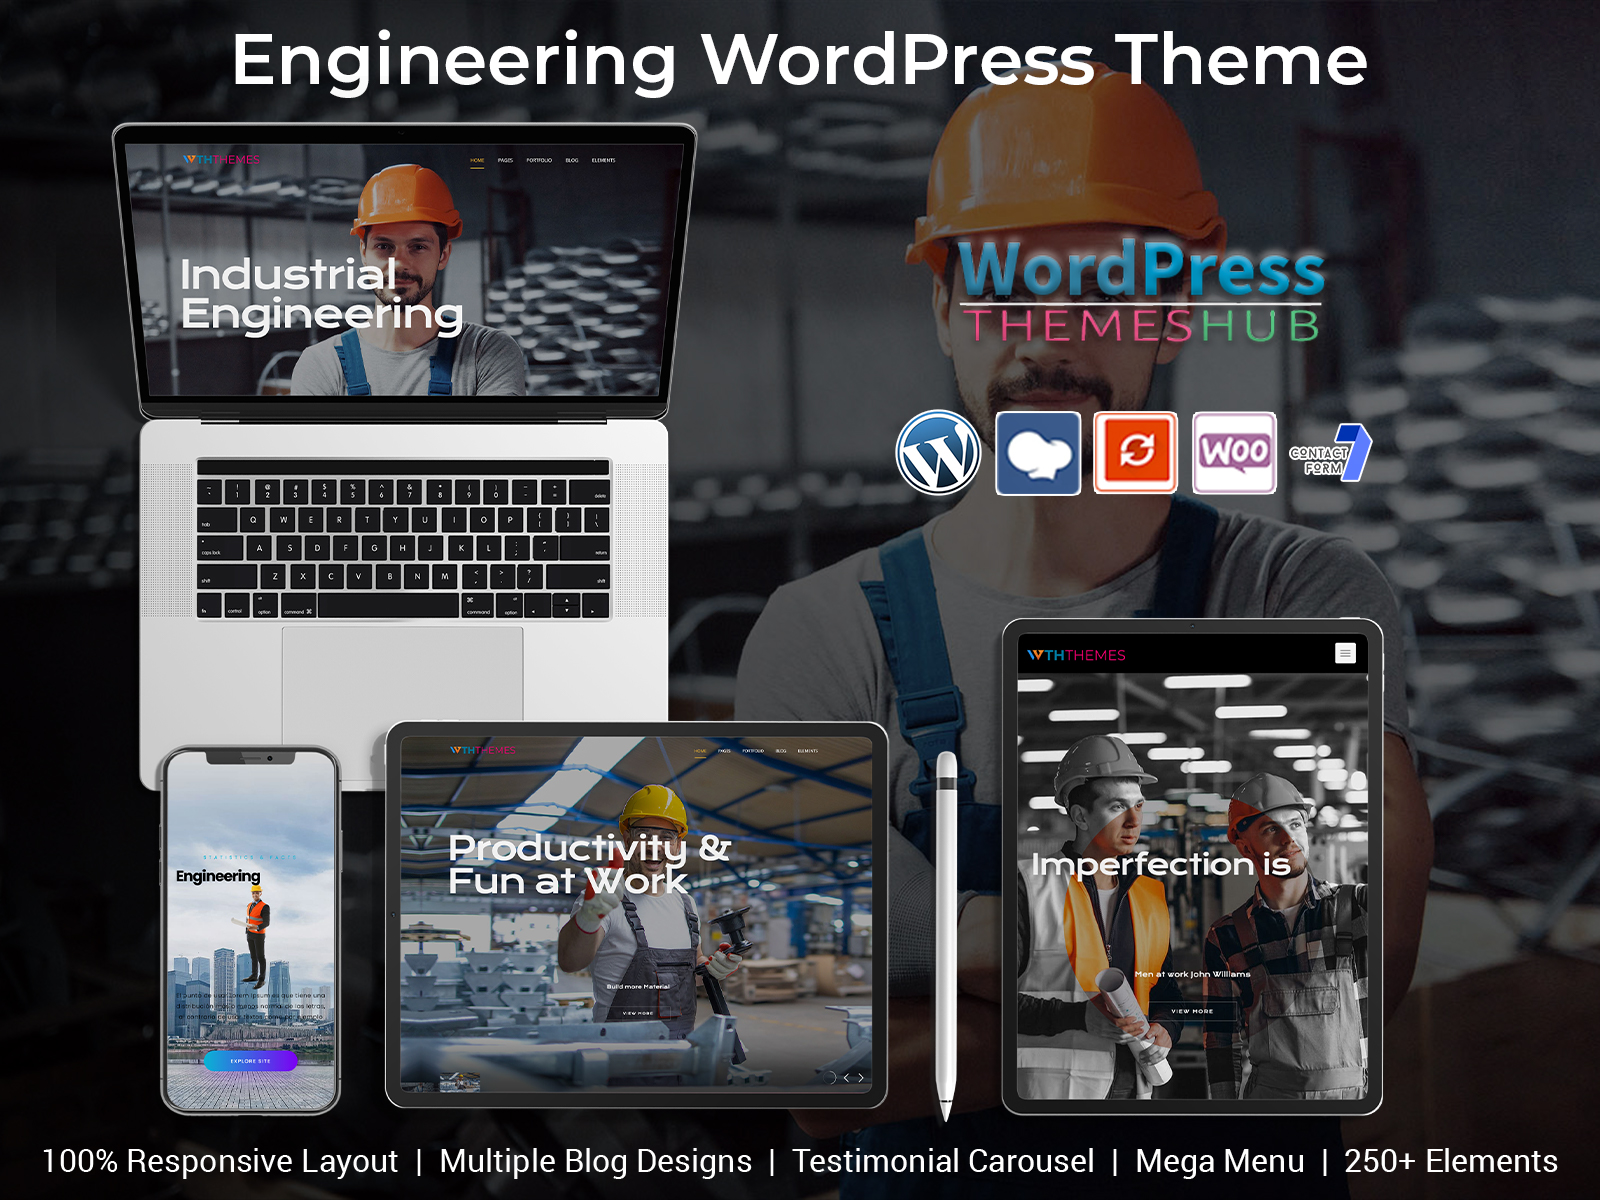 Engineering WordPress Theme Website With Cool Features